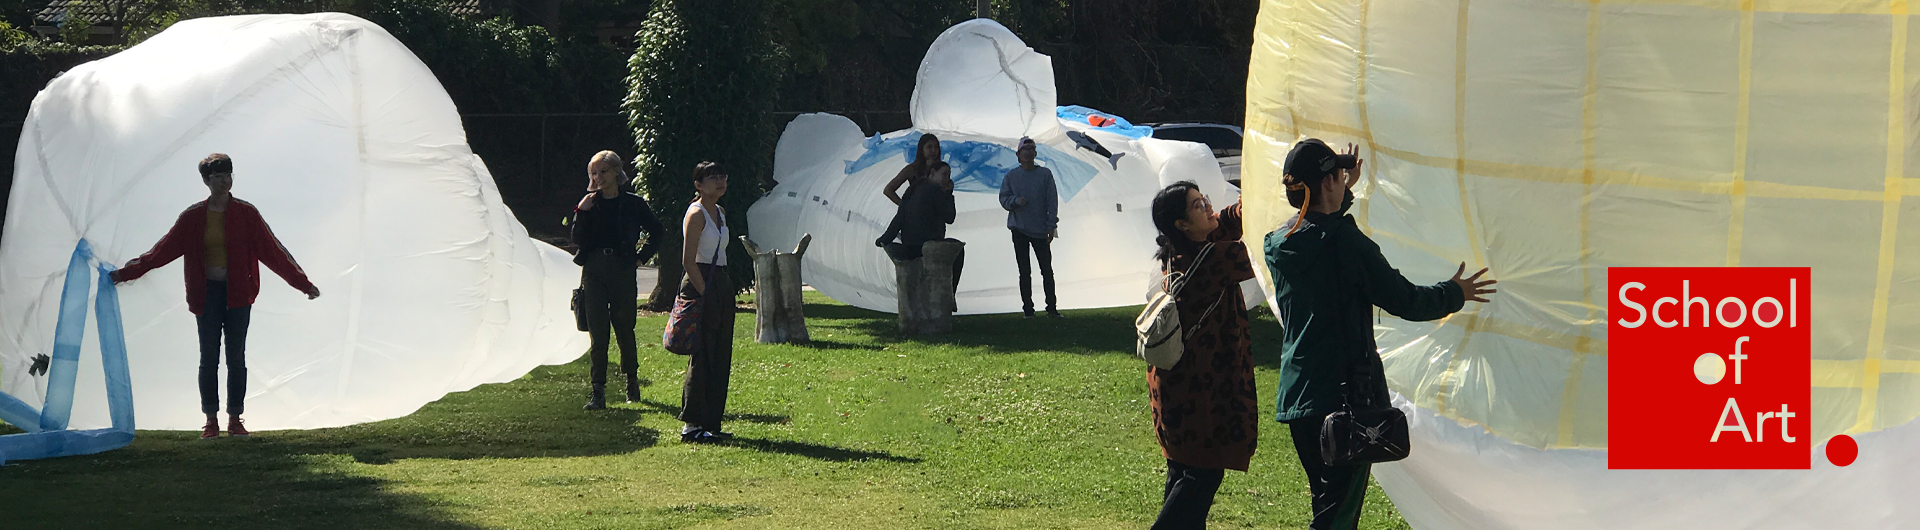 Students in grassy area looking at inflated art installation. 